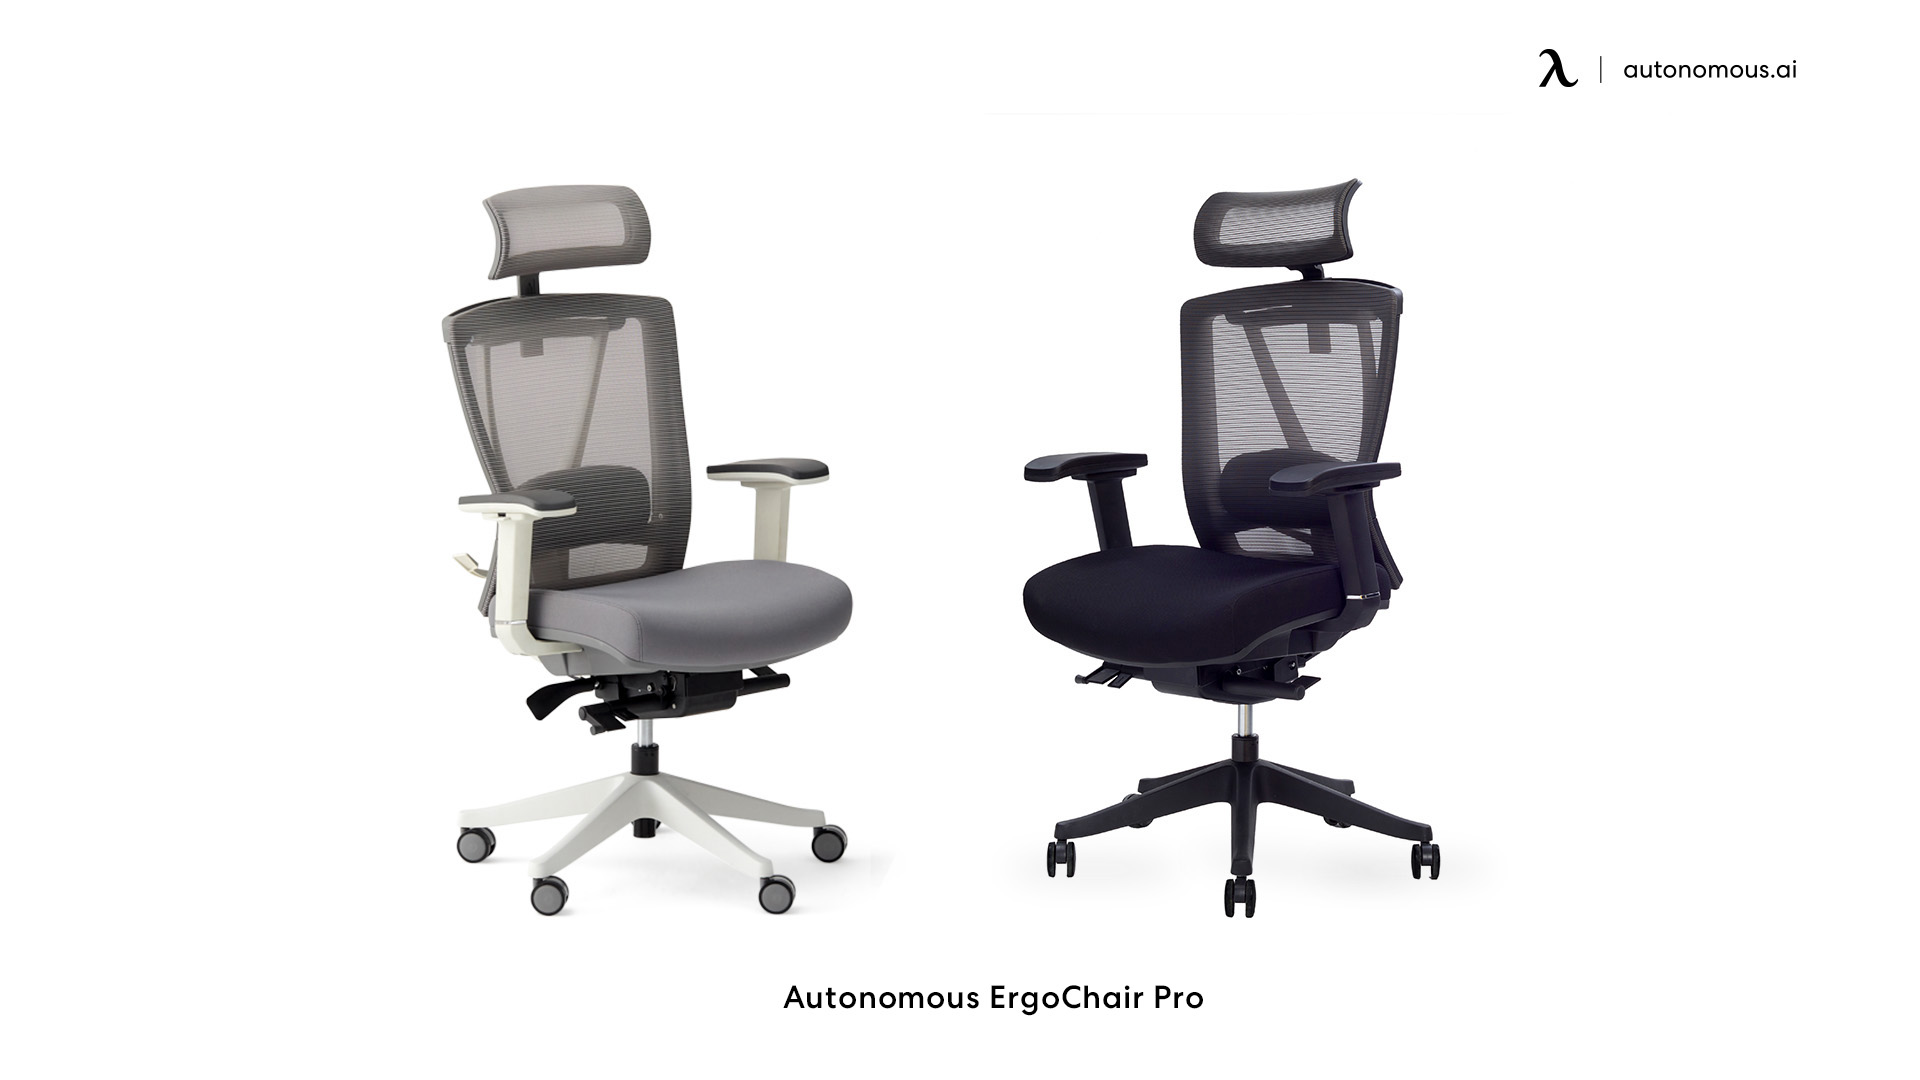 Autonomous ErgoChair Pro gaming chair with led lights